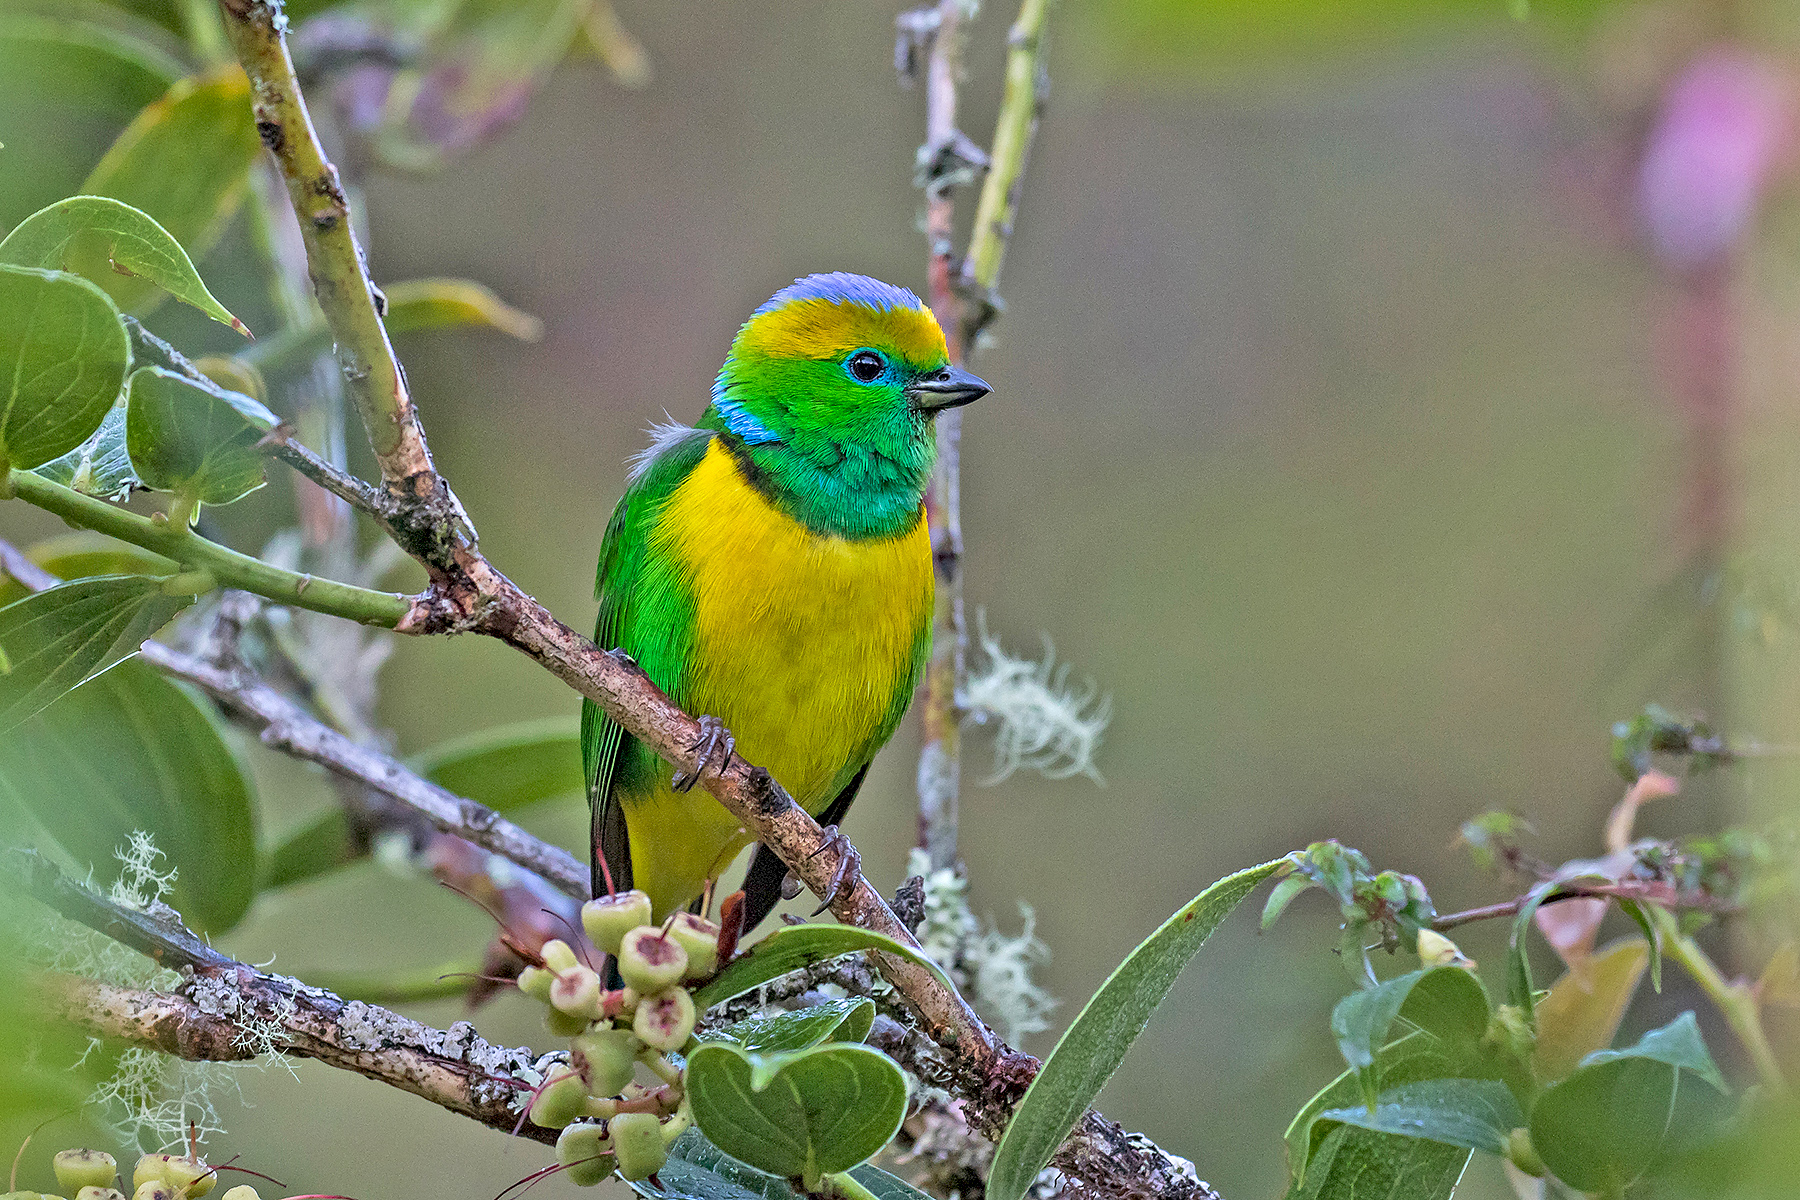 Golden-browed Chlorophonia (image by Pete Morris)